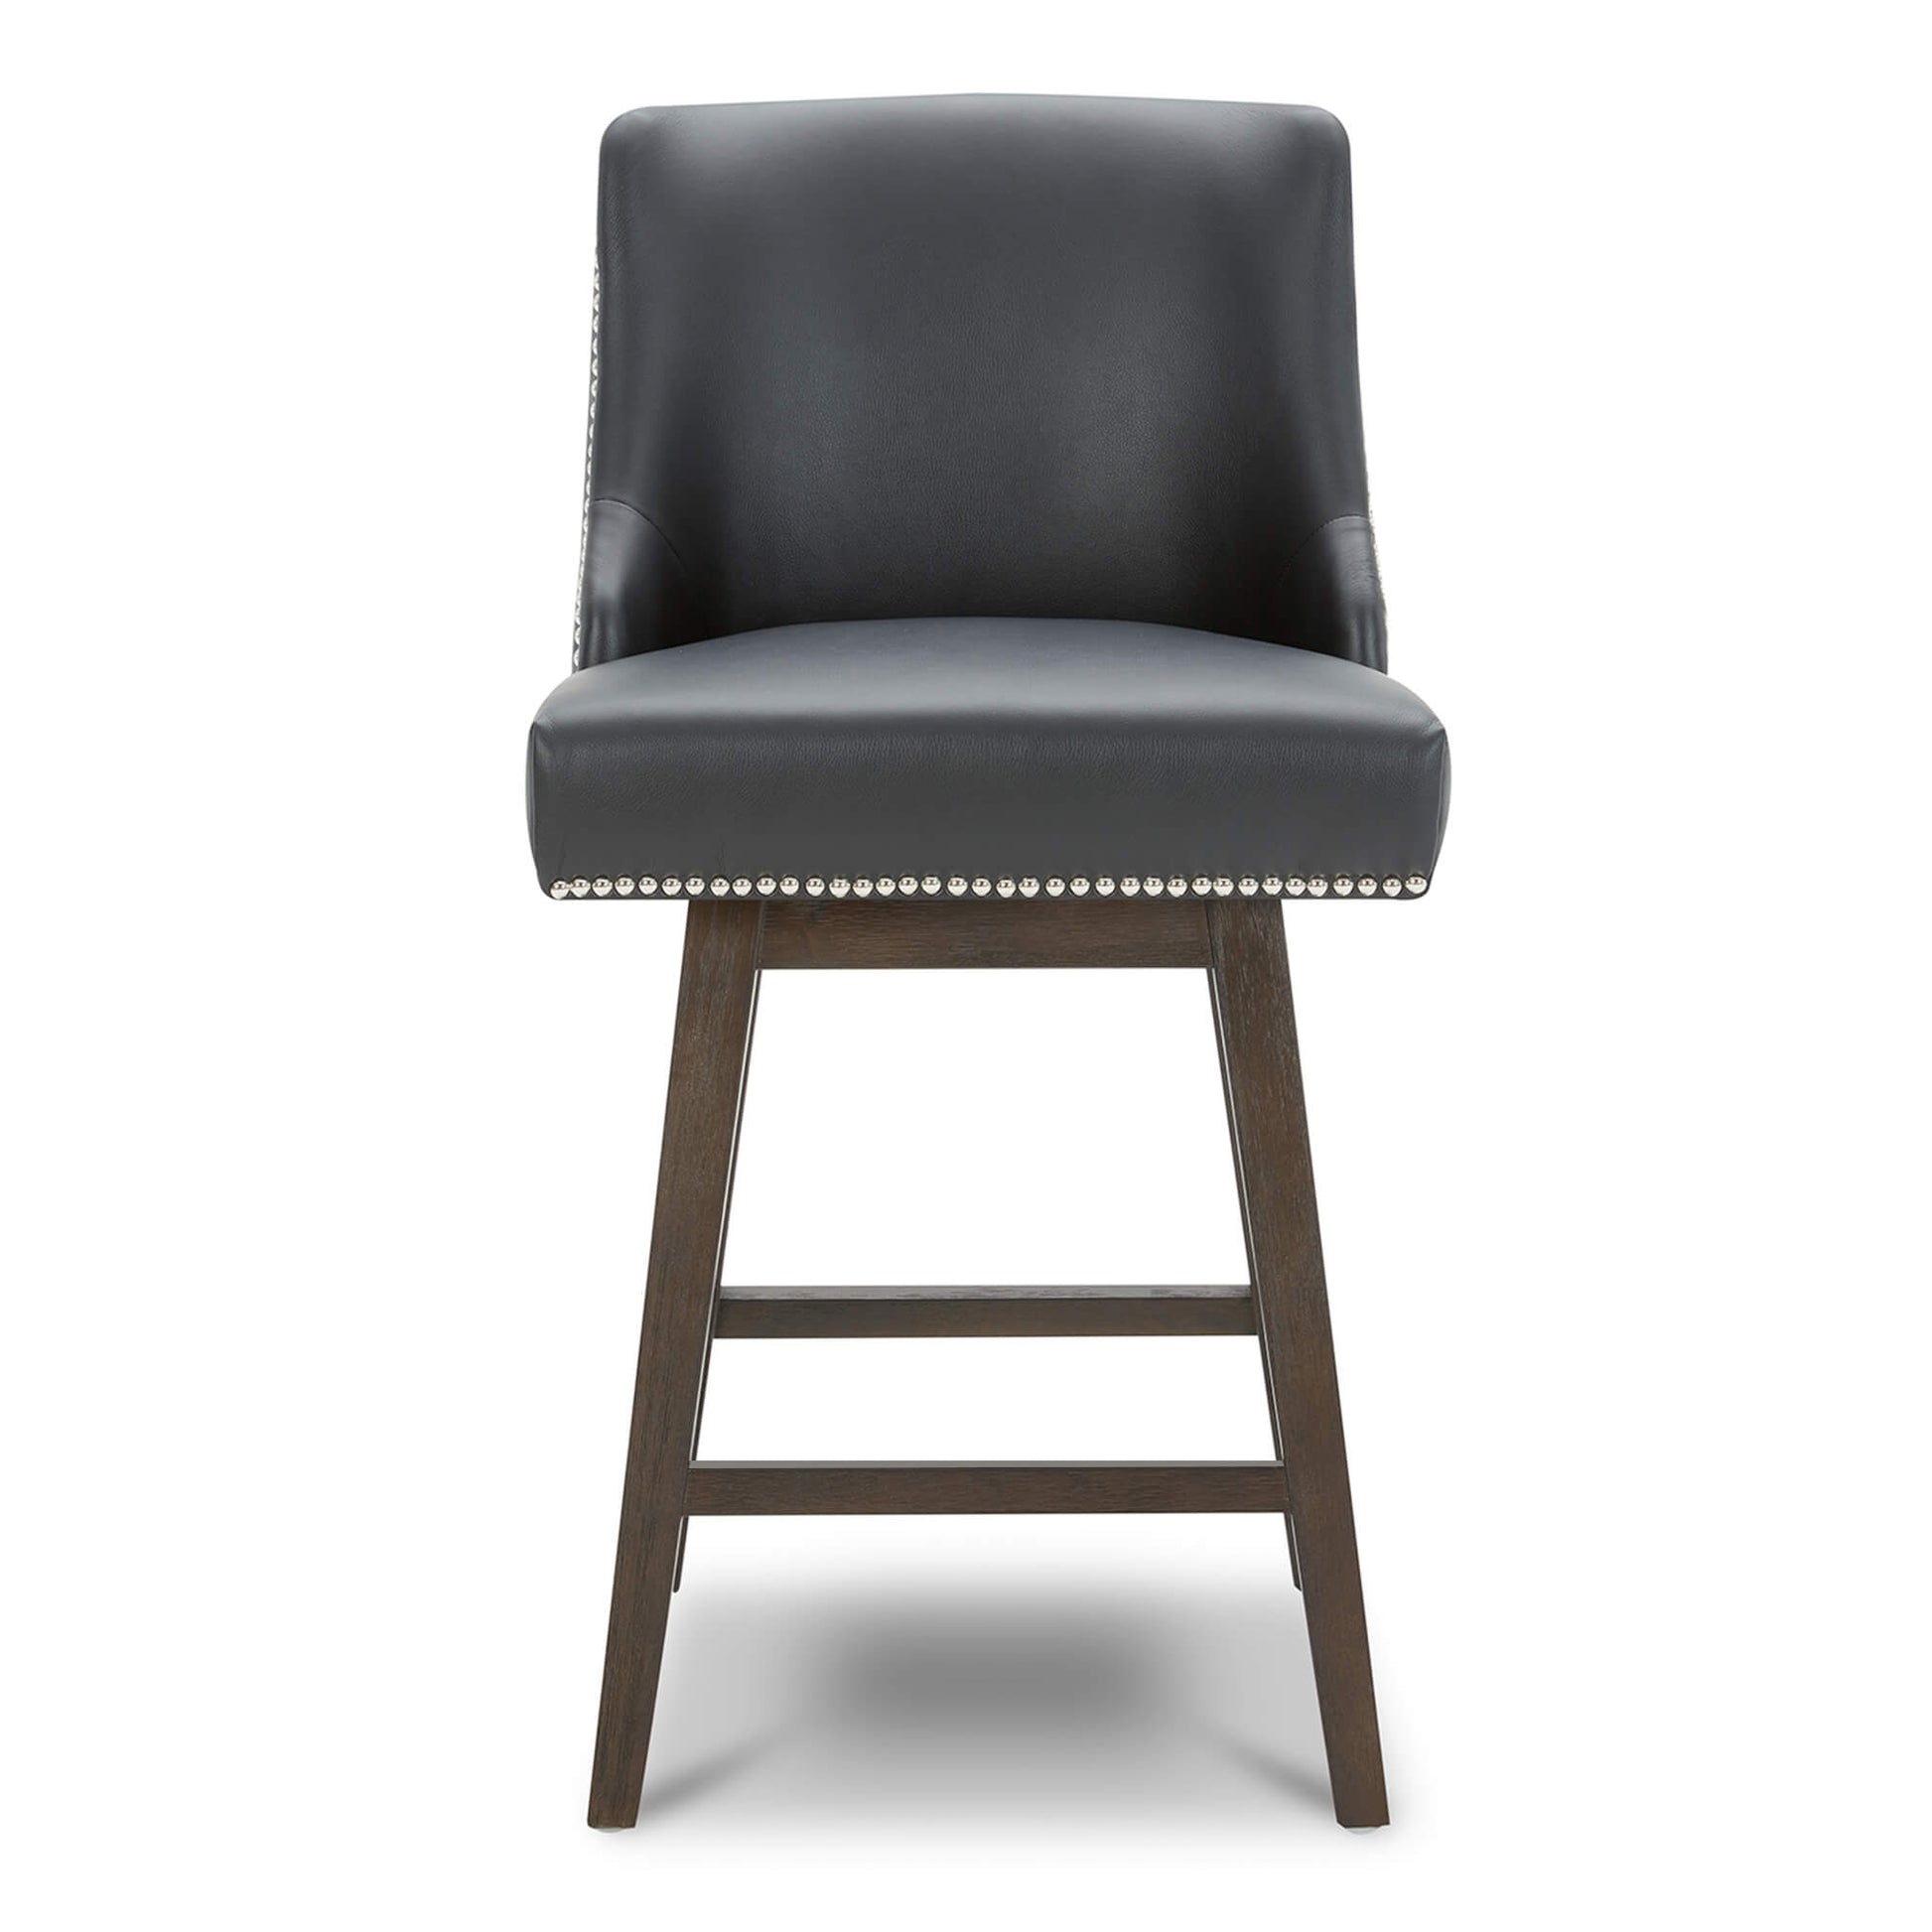 CHITA LIVING-Asher Swivel Counter Stool with Nailhead Trim-Counter Stools-Faux Leather-Black-